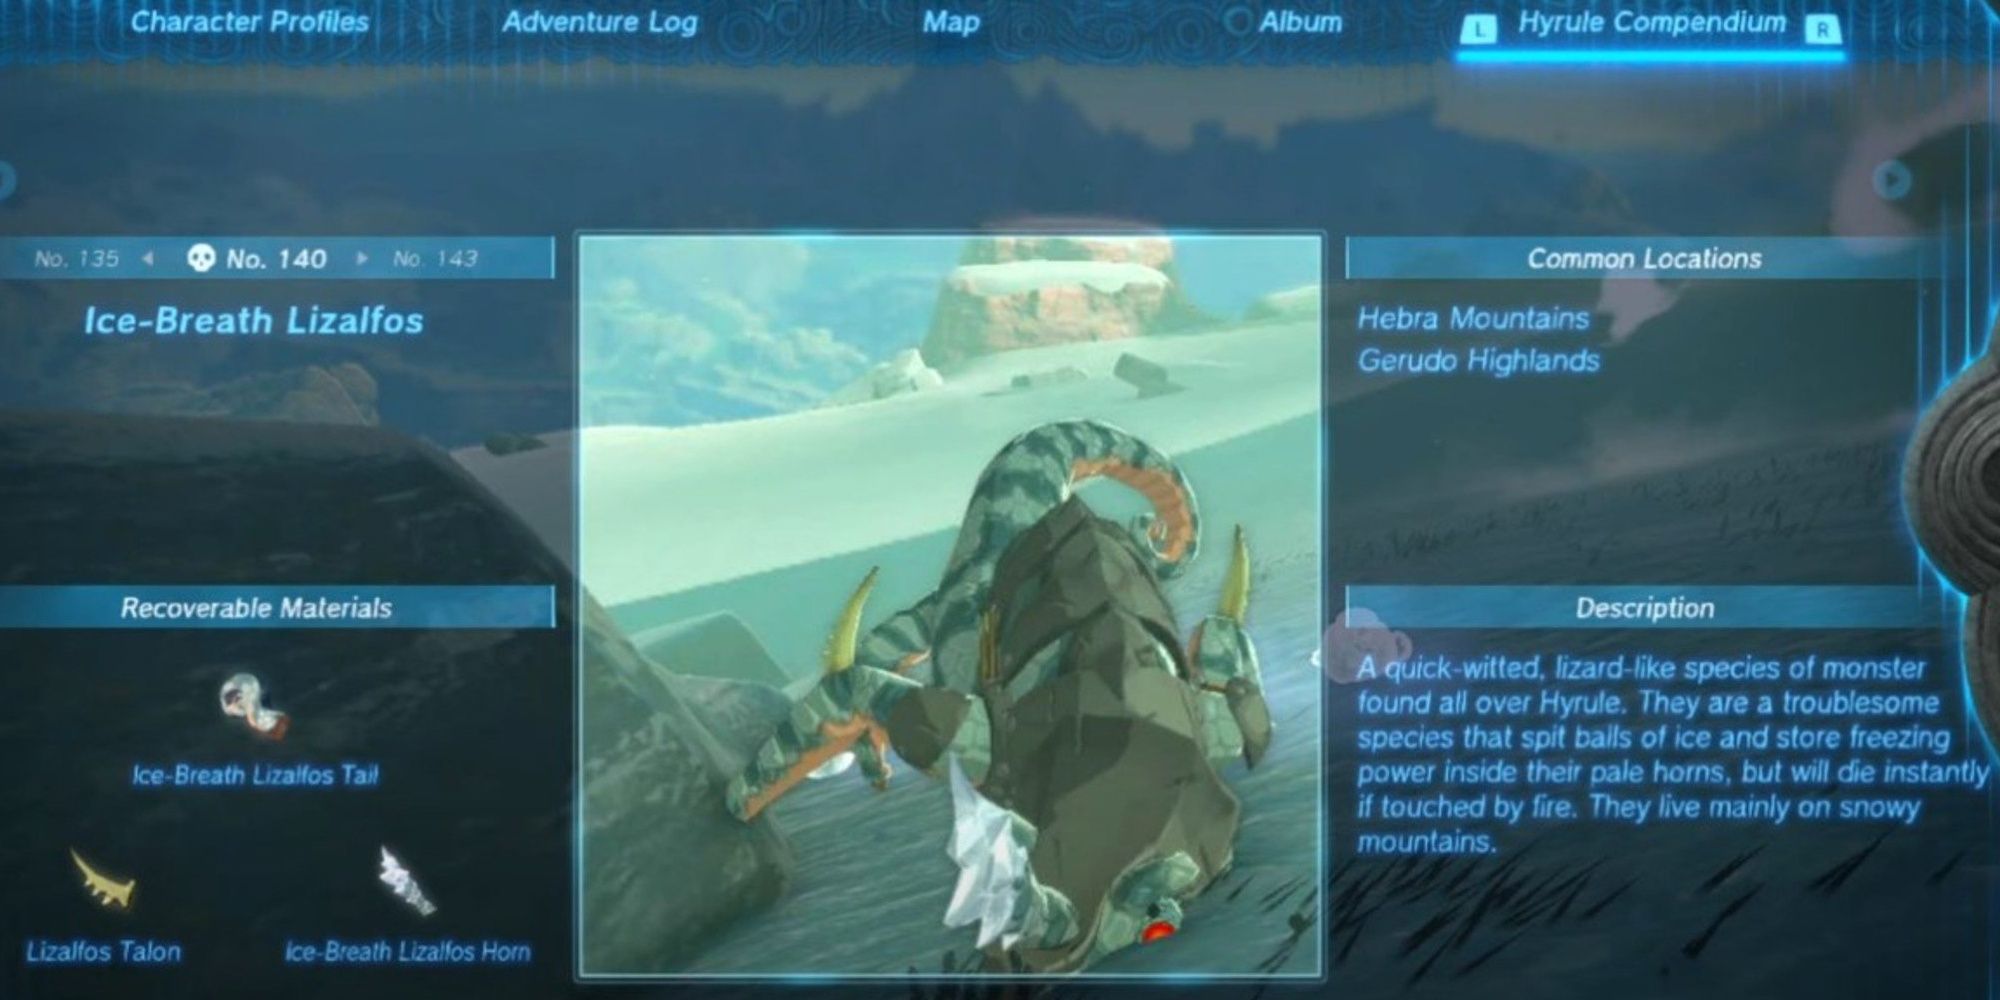 The character in The Legend Of Zelda: Tears Of The Kingdom is showing an Ice-breath Lizalfos as well as the items you can get from it.